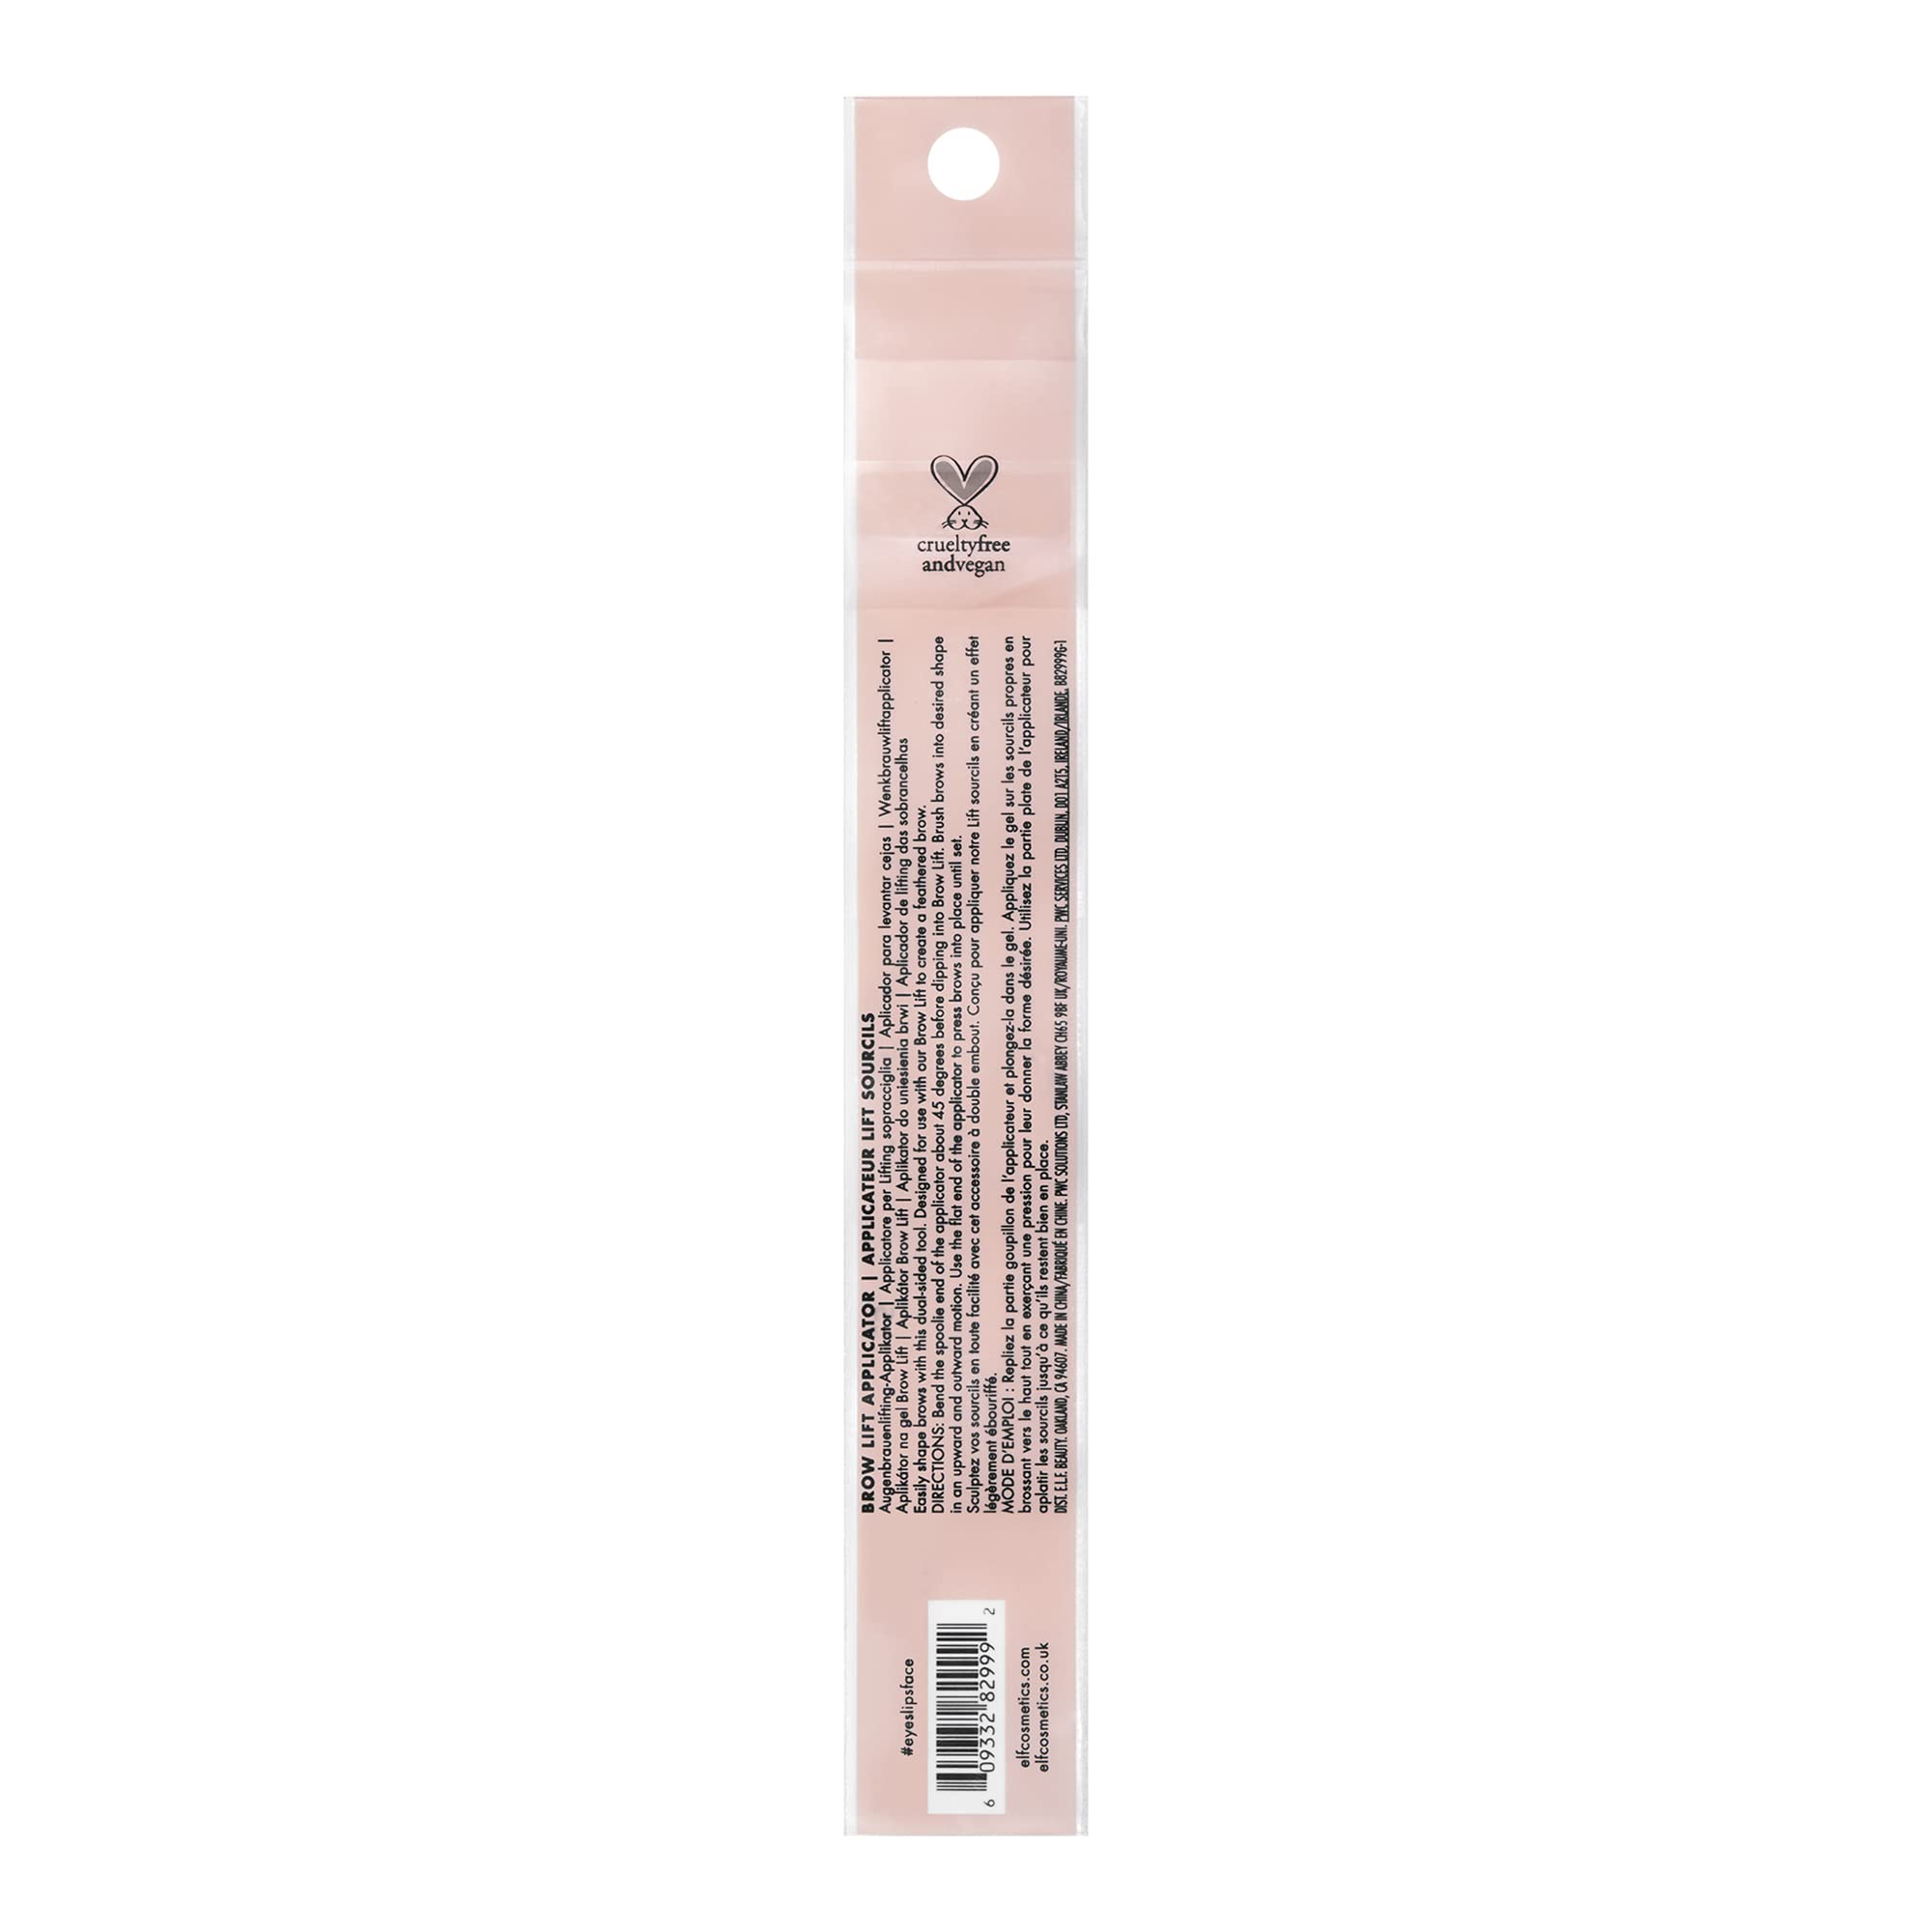 e.l.f. Cosmetics Brow Lift Applicator, Dual-Ended Eyebrow Brush For Grooming & Lifting Brows & Applying Brow Wax, Creates A Fluffy Feathered Look